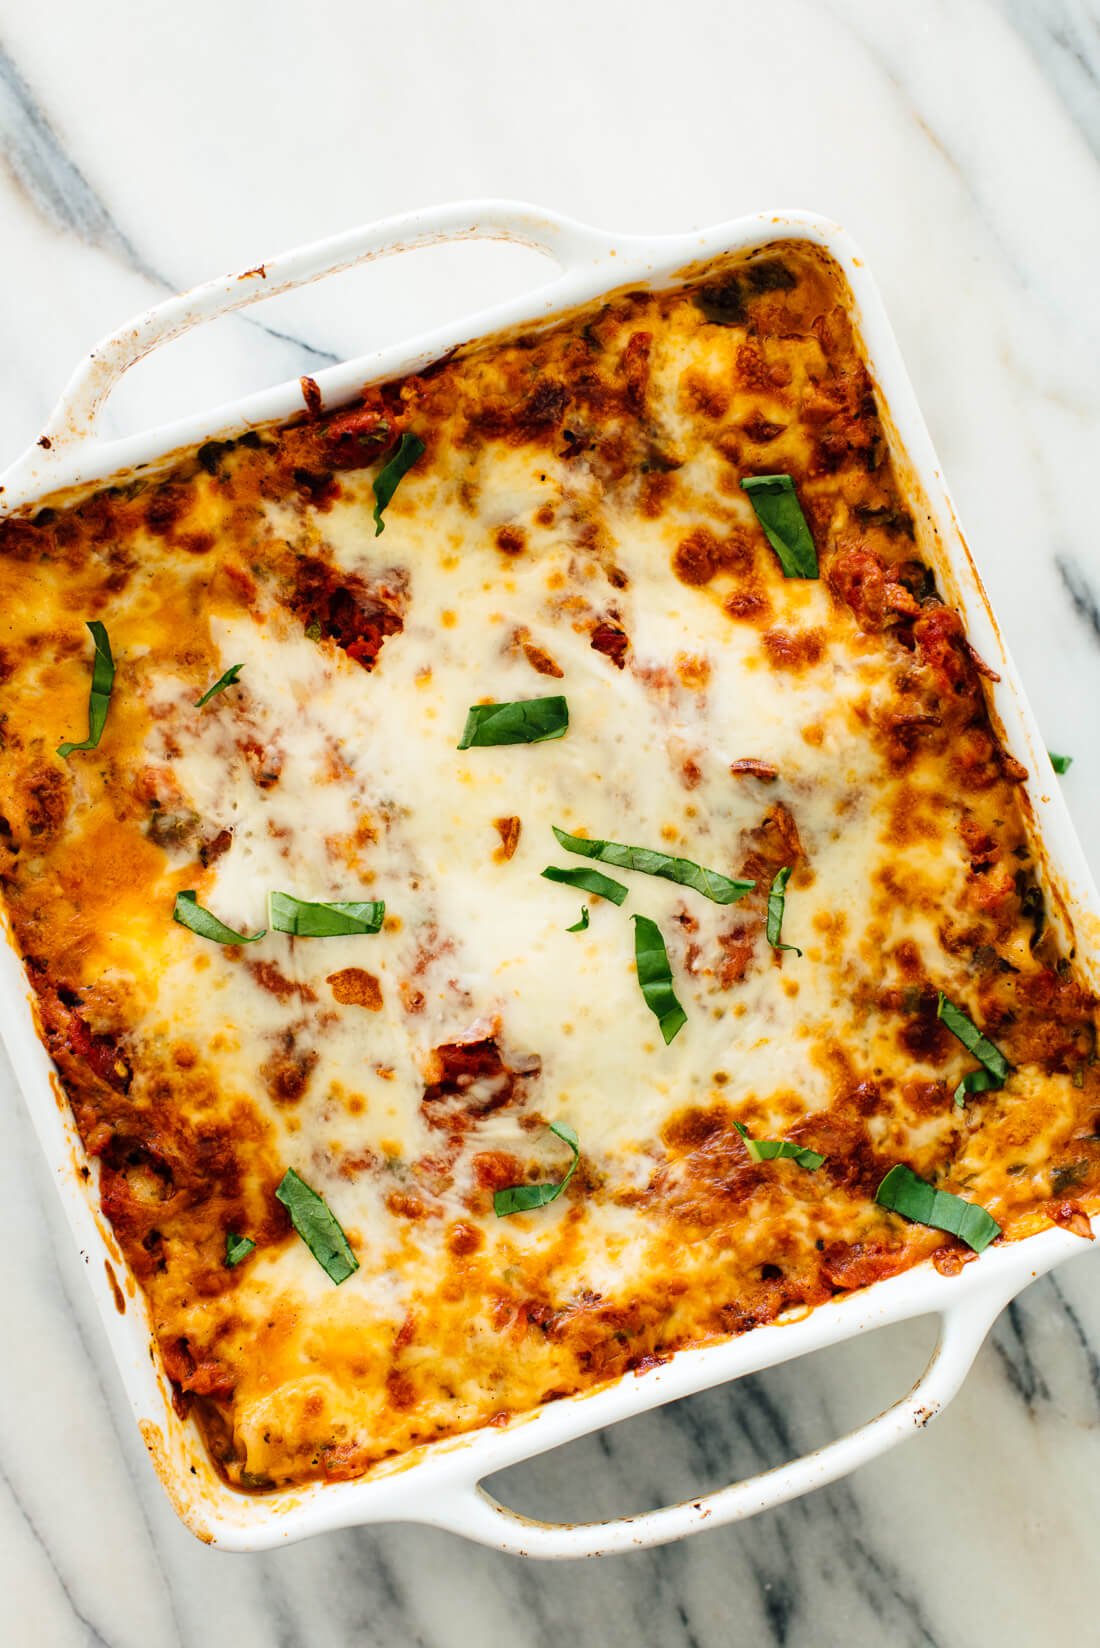 This amazing veggie lasagna recipe will please the carnivores in your life! It's cheesy, delicious and loaded with vegetables and spinach.